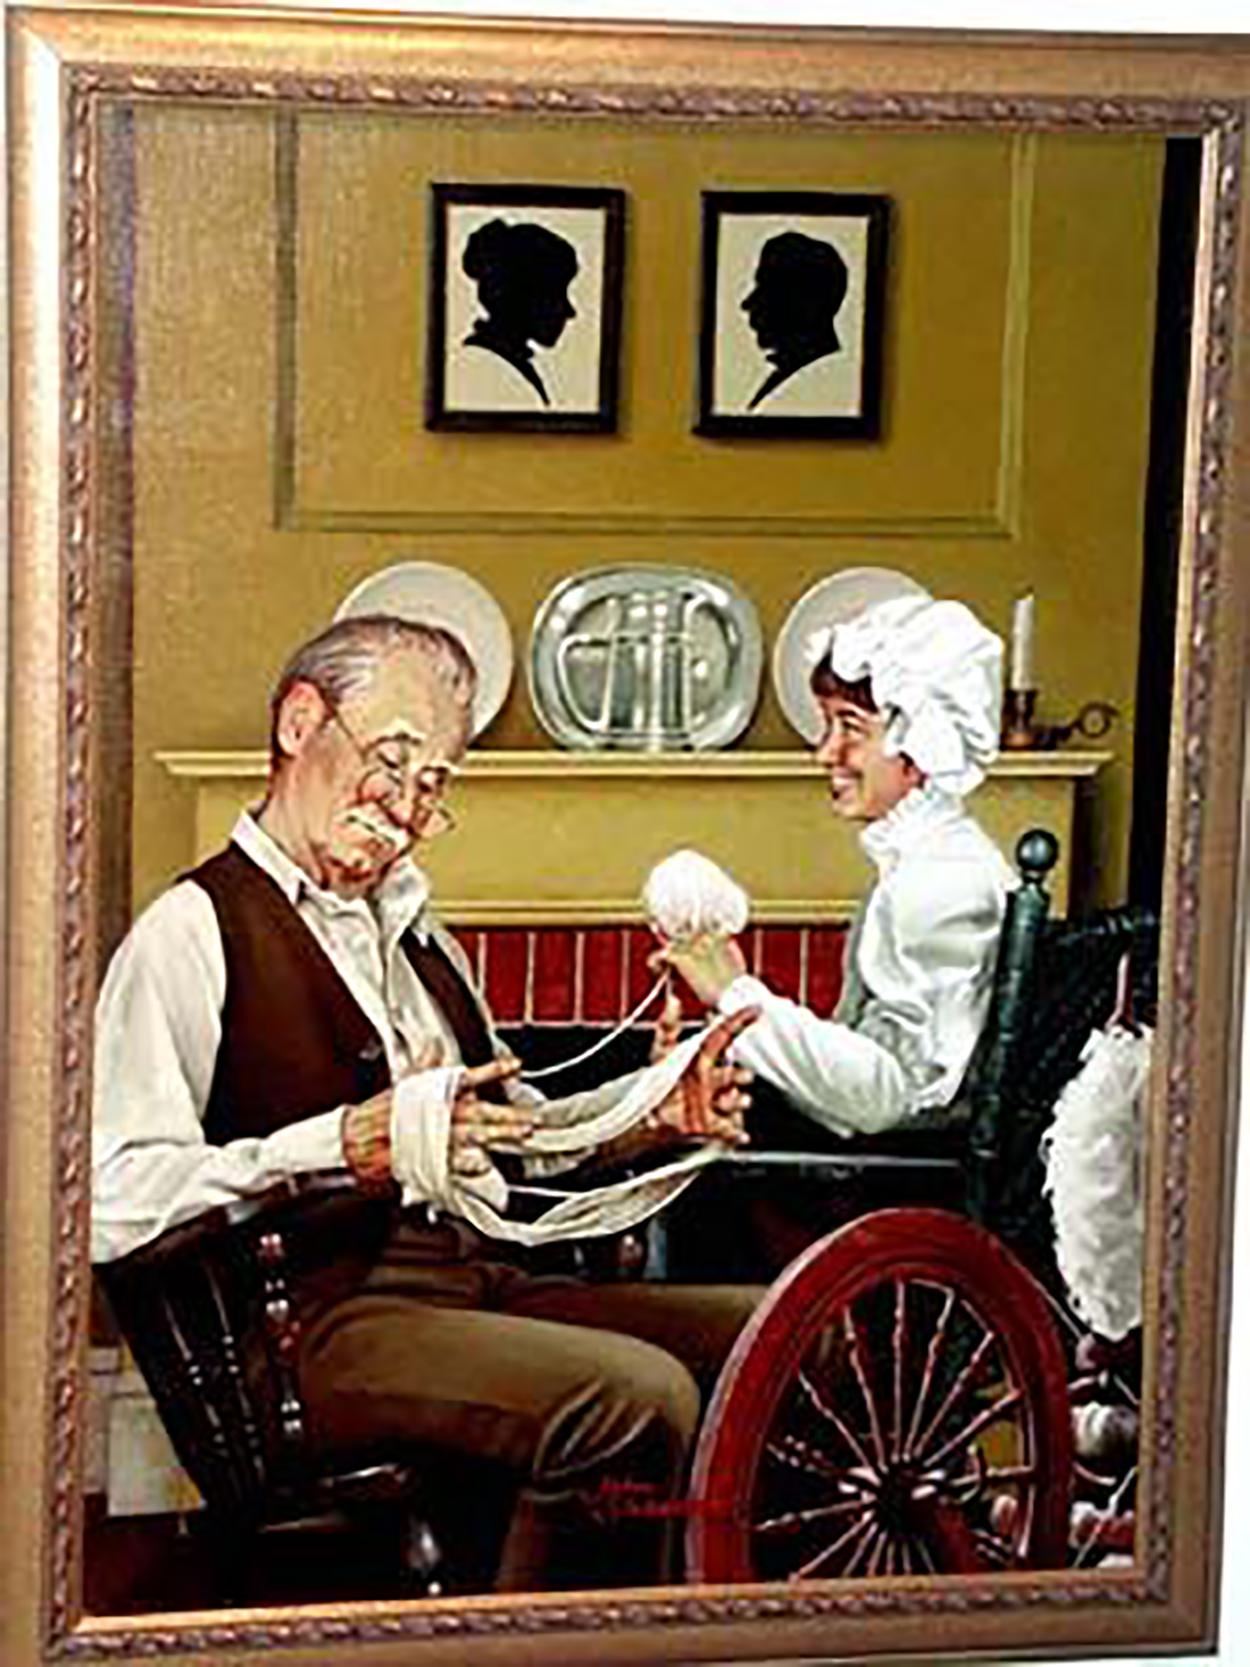 Grandfather Helps with Knitting - Painting by John Slobodnik